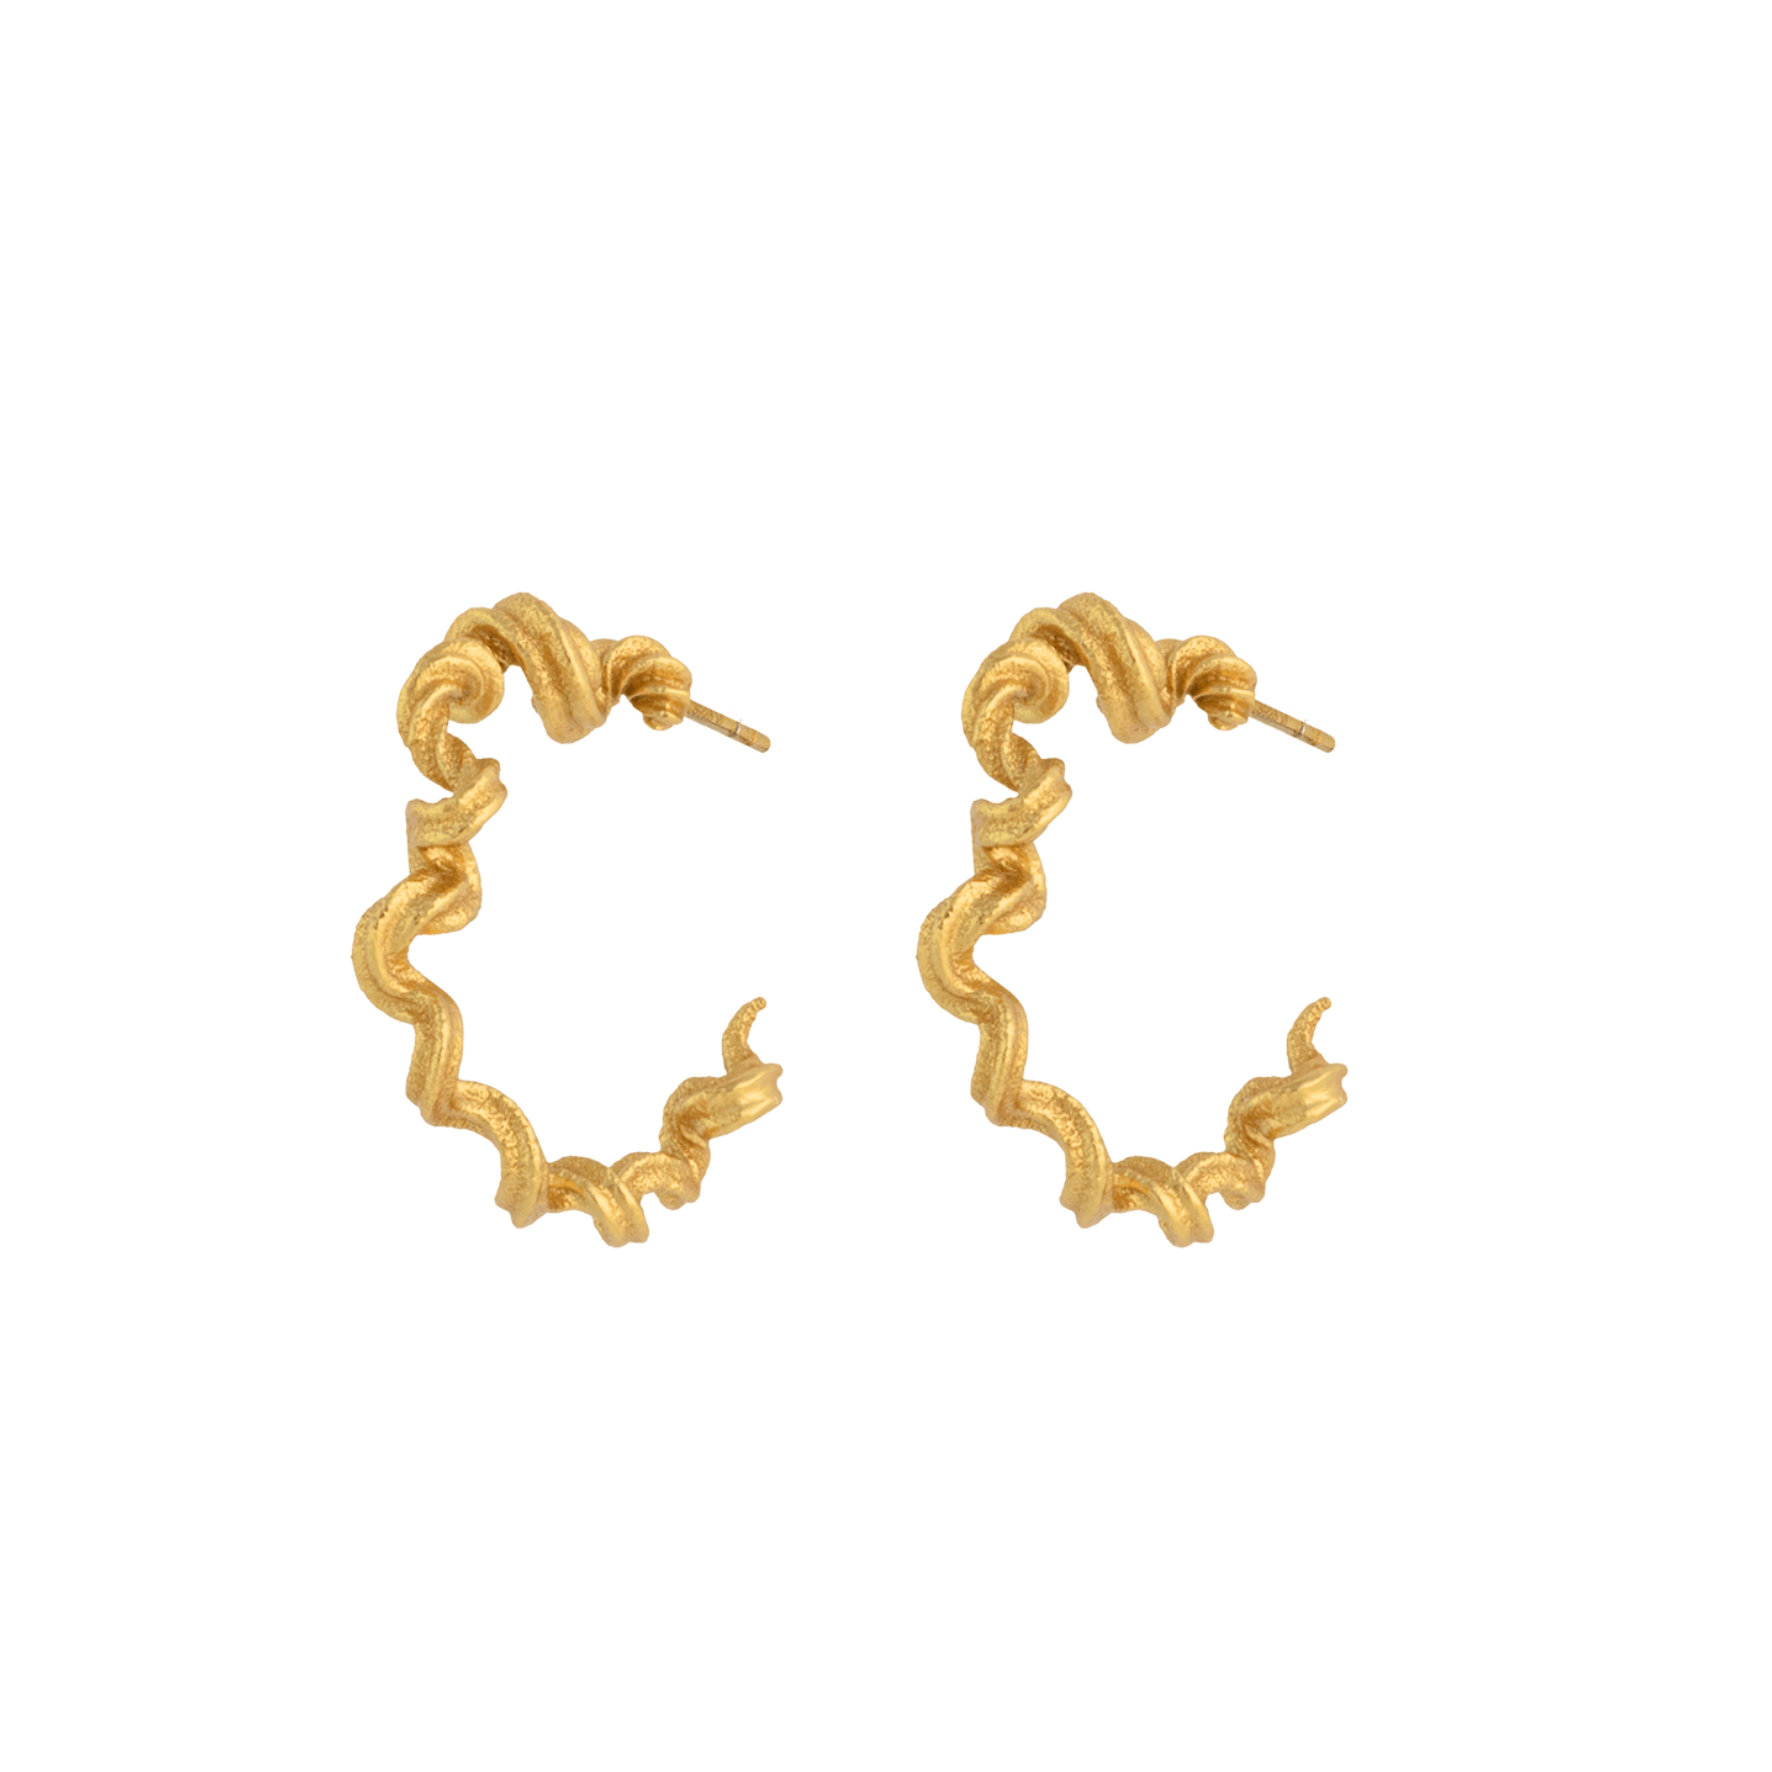 Alchemy Hoop Earrings from House Of Vincent in Goldplated Silver Sterling 925